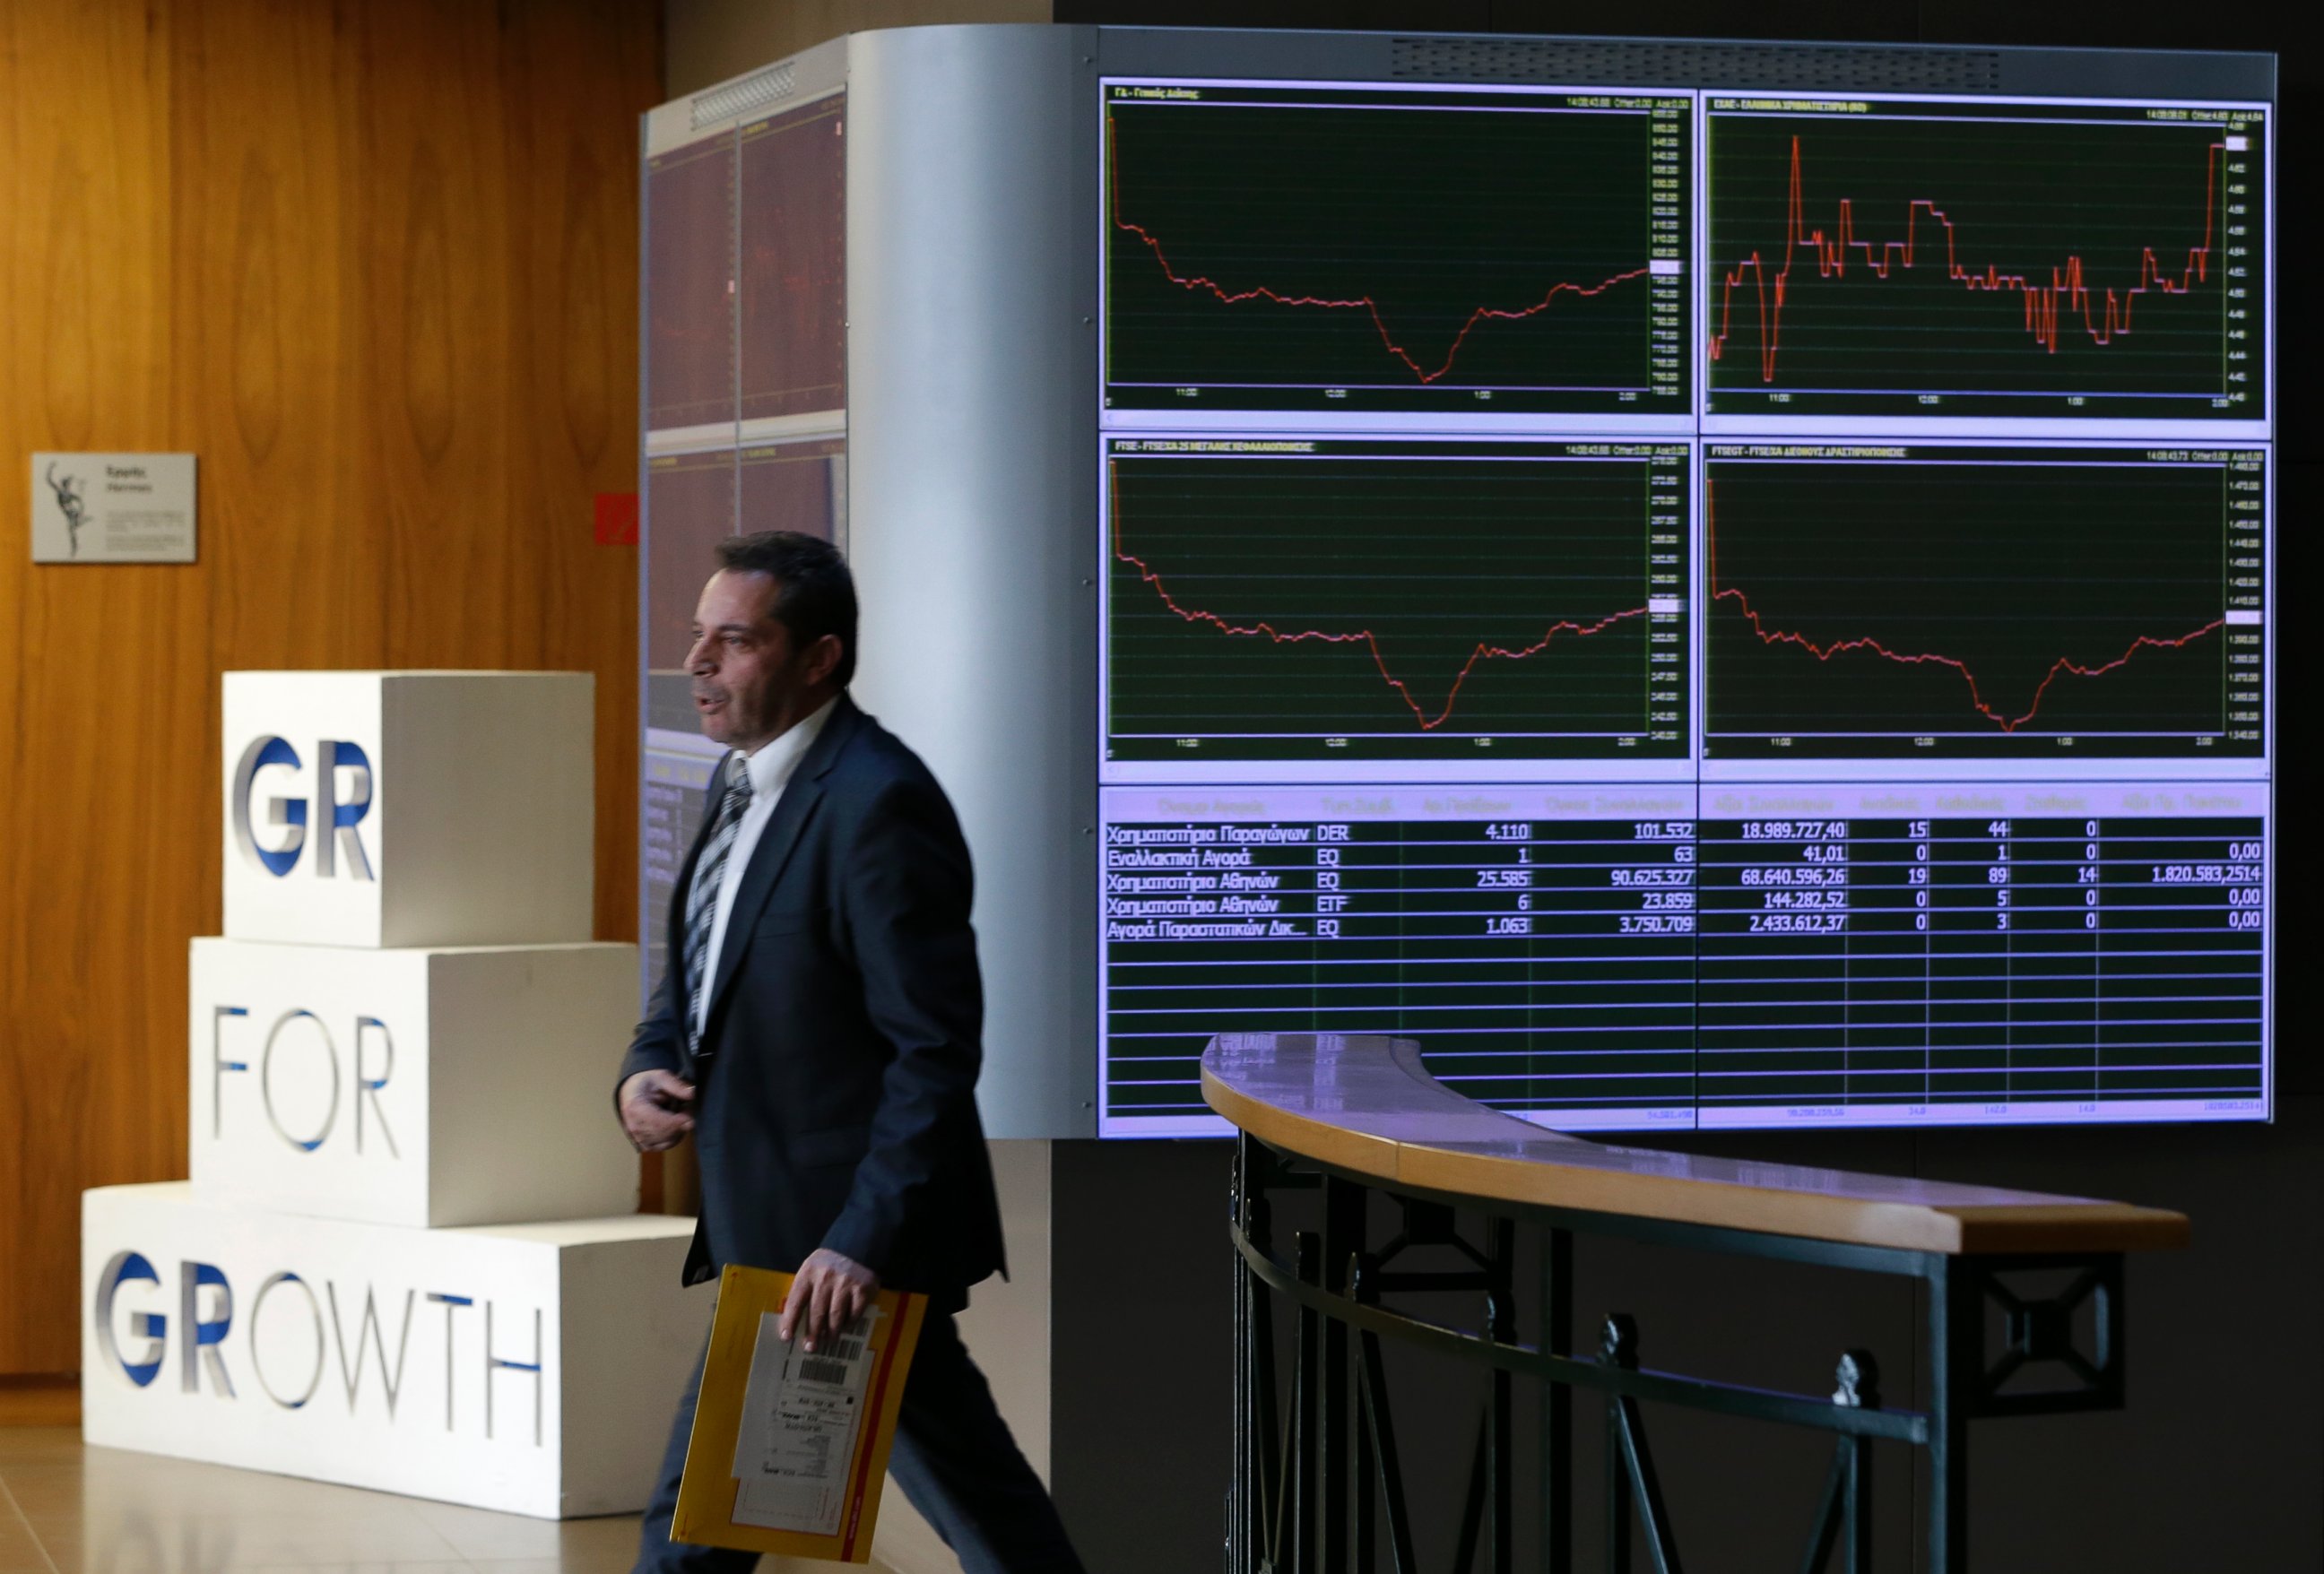 PHOTO: An employee of the Stock Exchange walks next to a display showing stock price movements in Athens, Dec. 29, 2014.